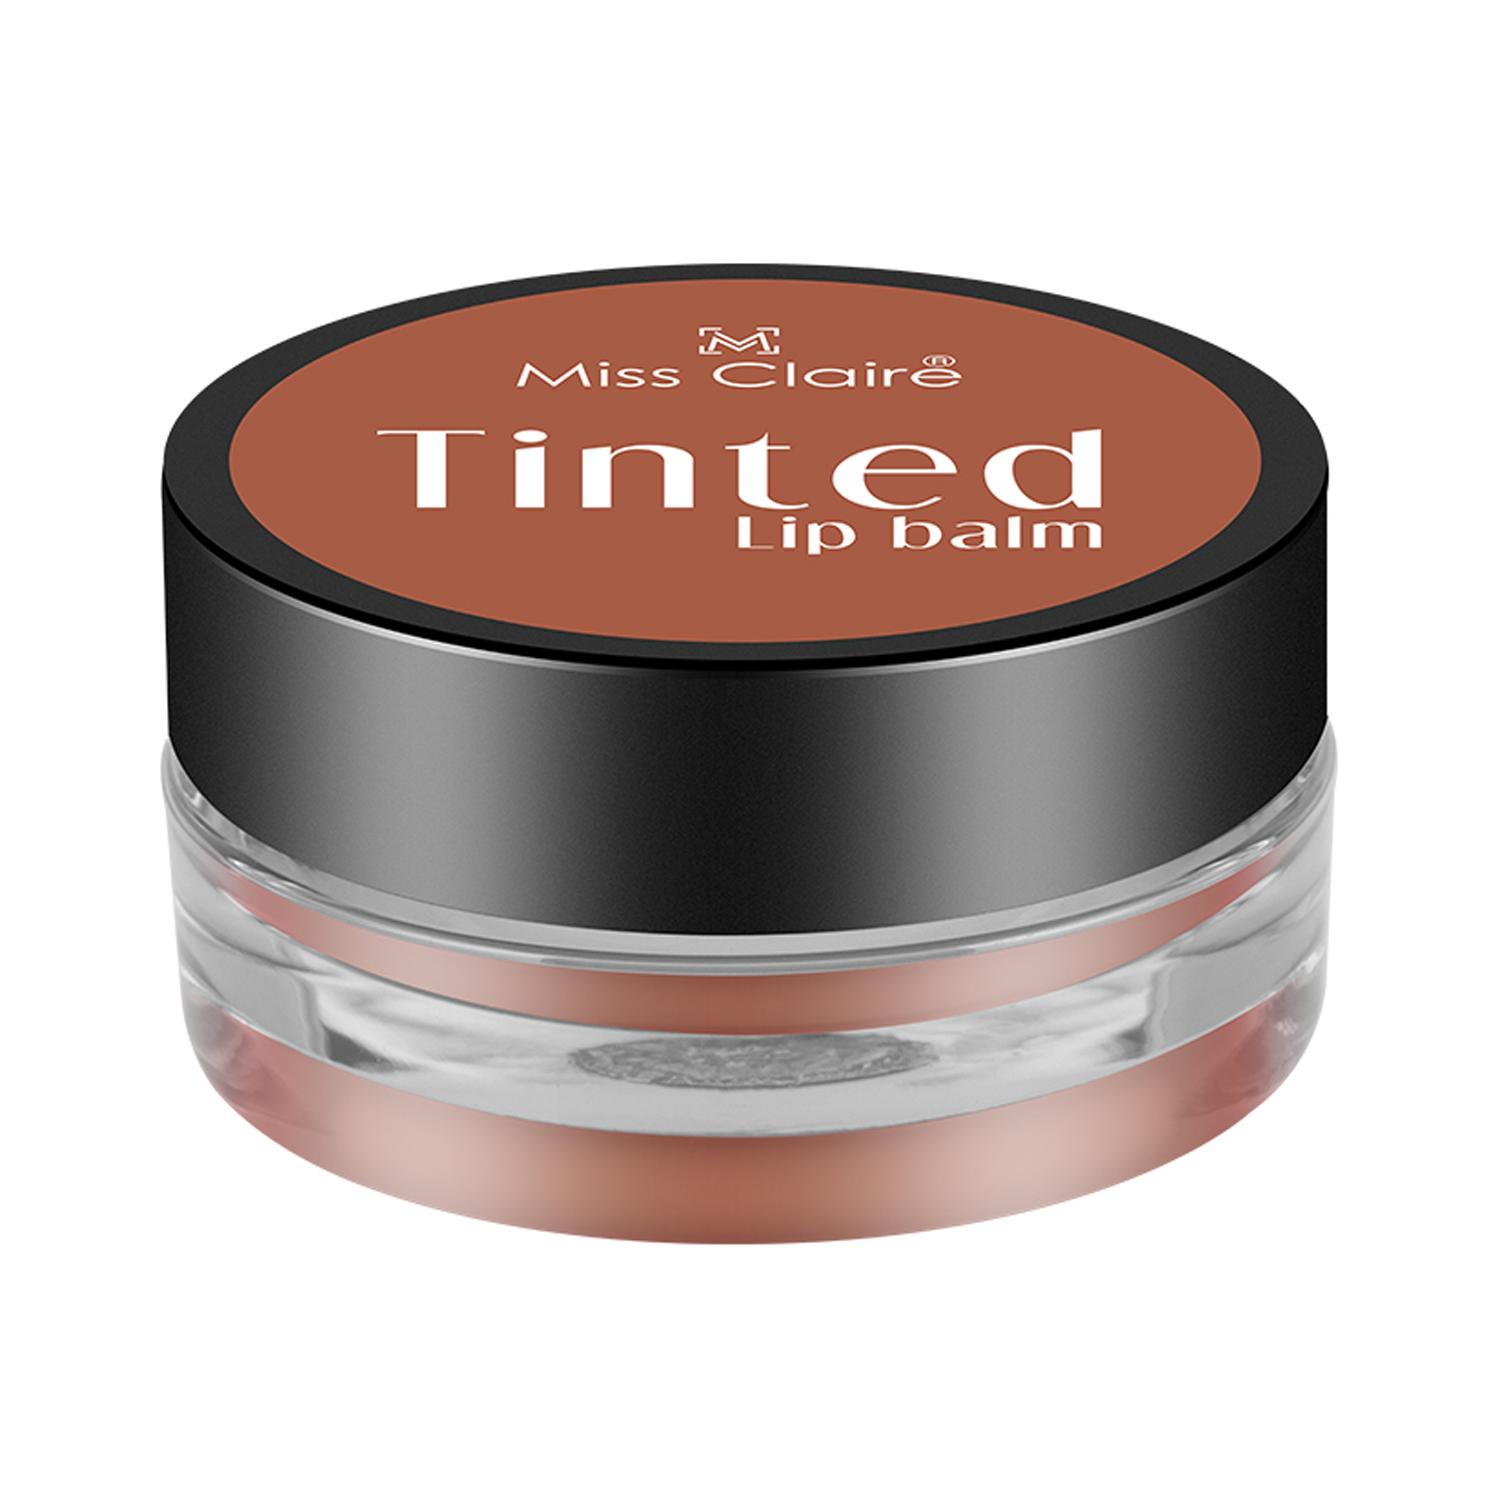 Miss Claire | Miss Claire Tinted Lip Balm - 03 Brown (3g)